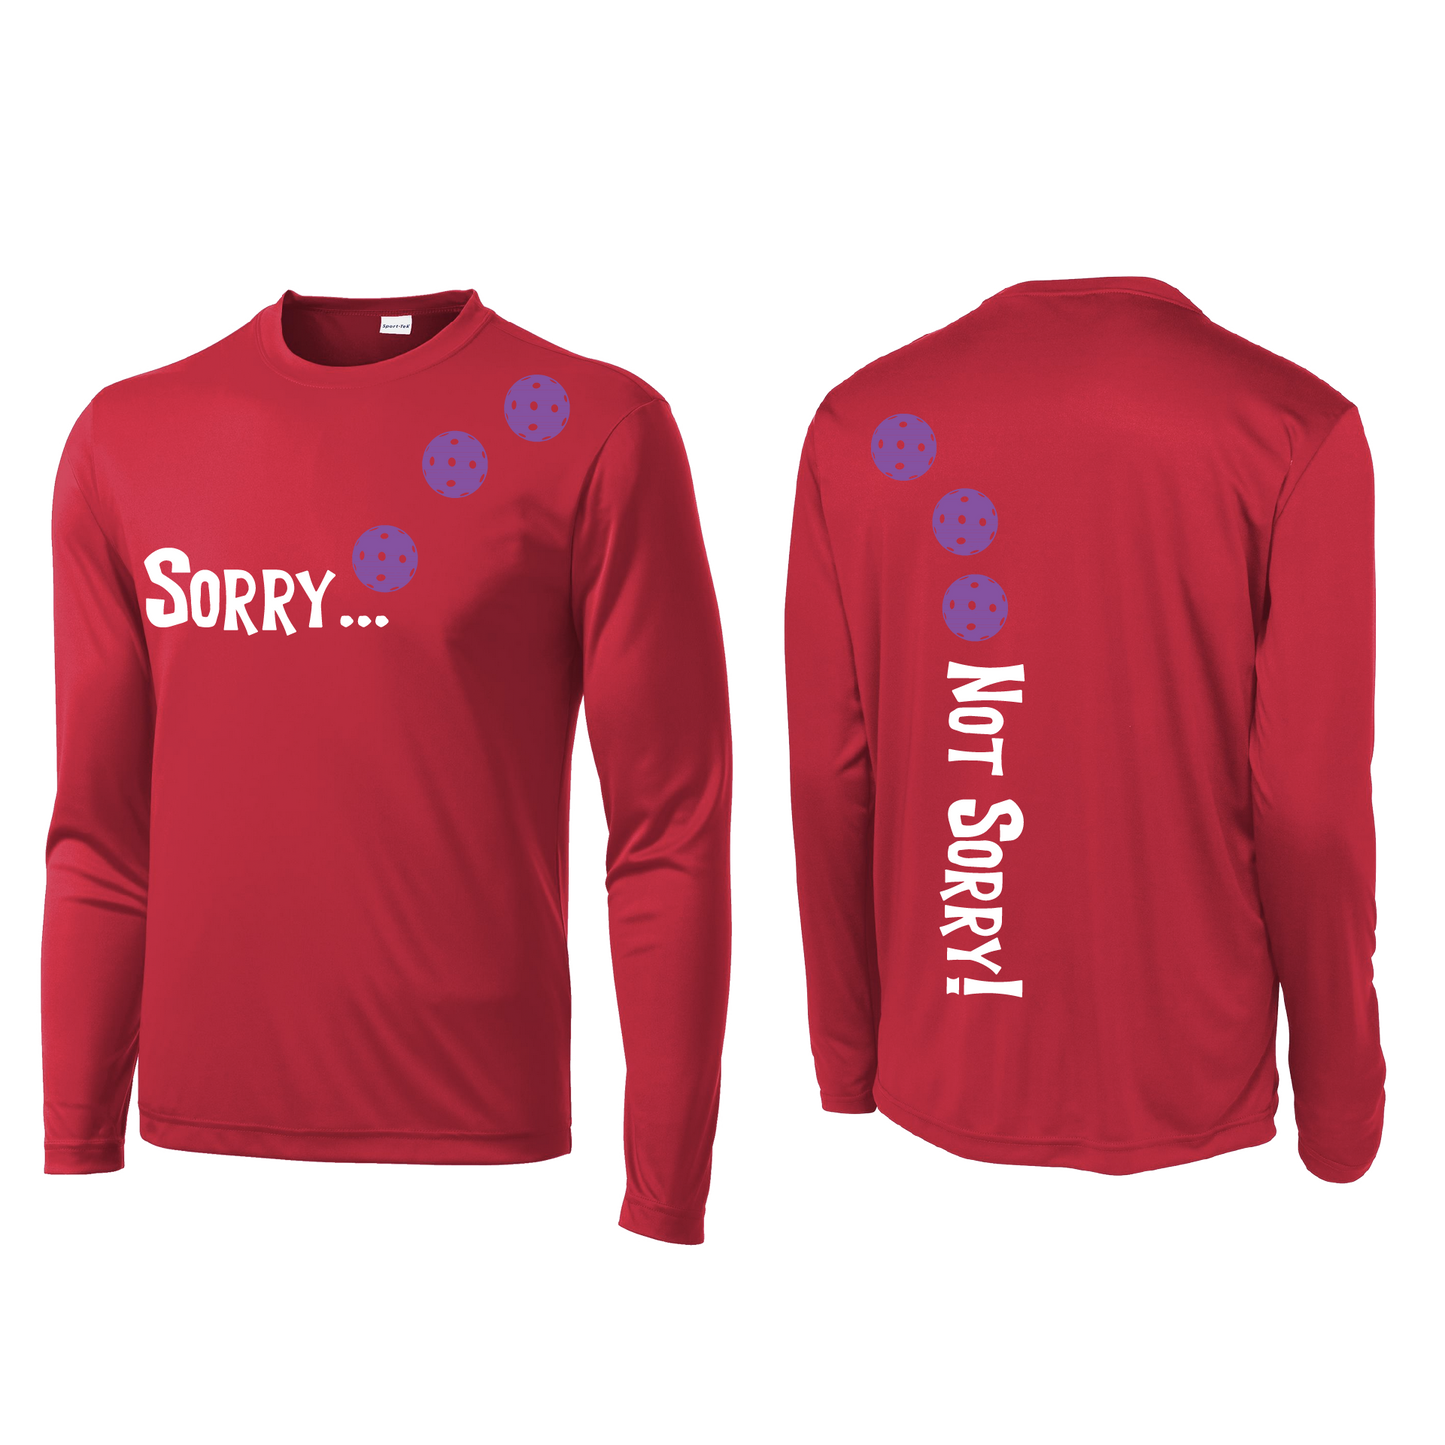 Design: Sorry...Not Sorry! with Customizable Ball Color - Choose: Green, Orange or Purple.  Men's Styles: Long-Sleeve .  Shirts are lightweight, roomy and highly breathable. These moisture-wicking shirts are designed for athletic performance. They feature PosiCharge technology to lock in color and prevent logos from fading. Removable tag and set-in sleeves for comfort.